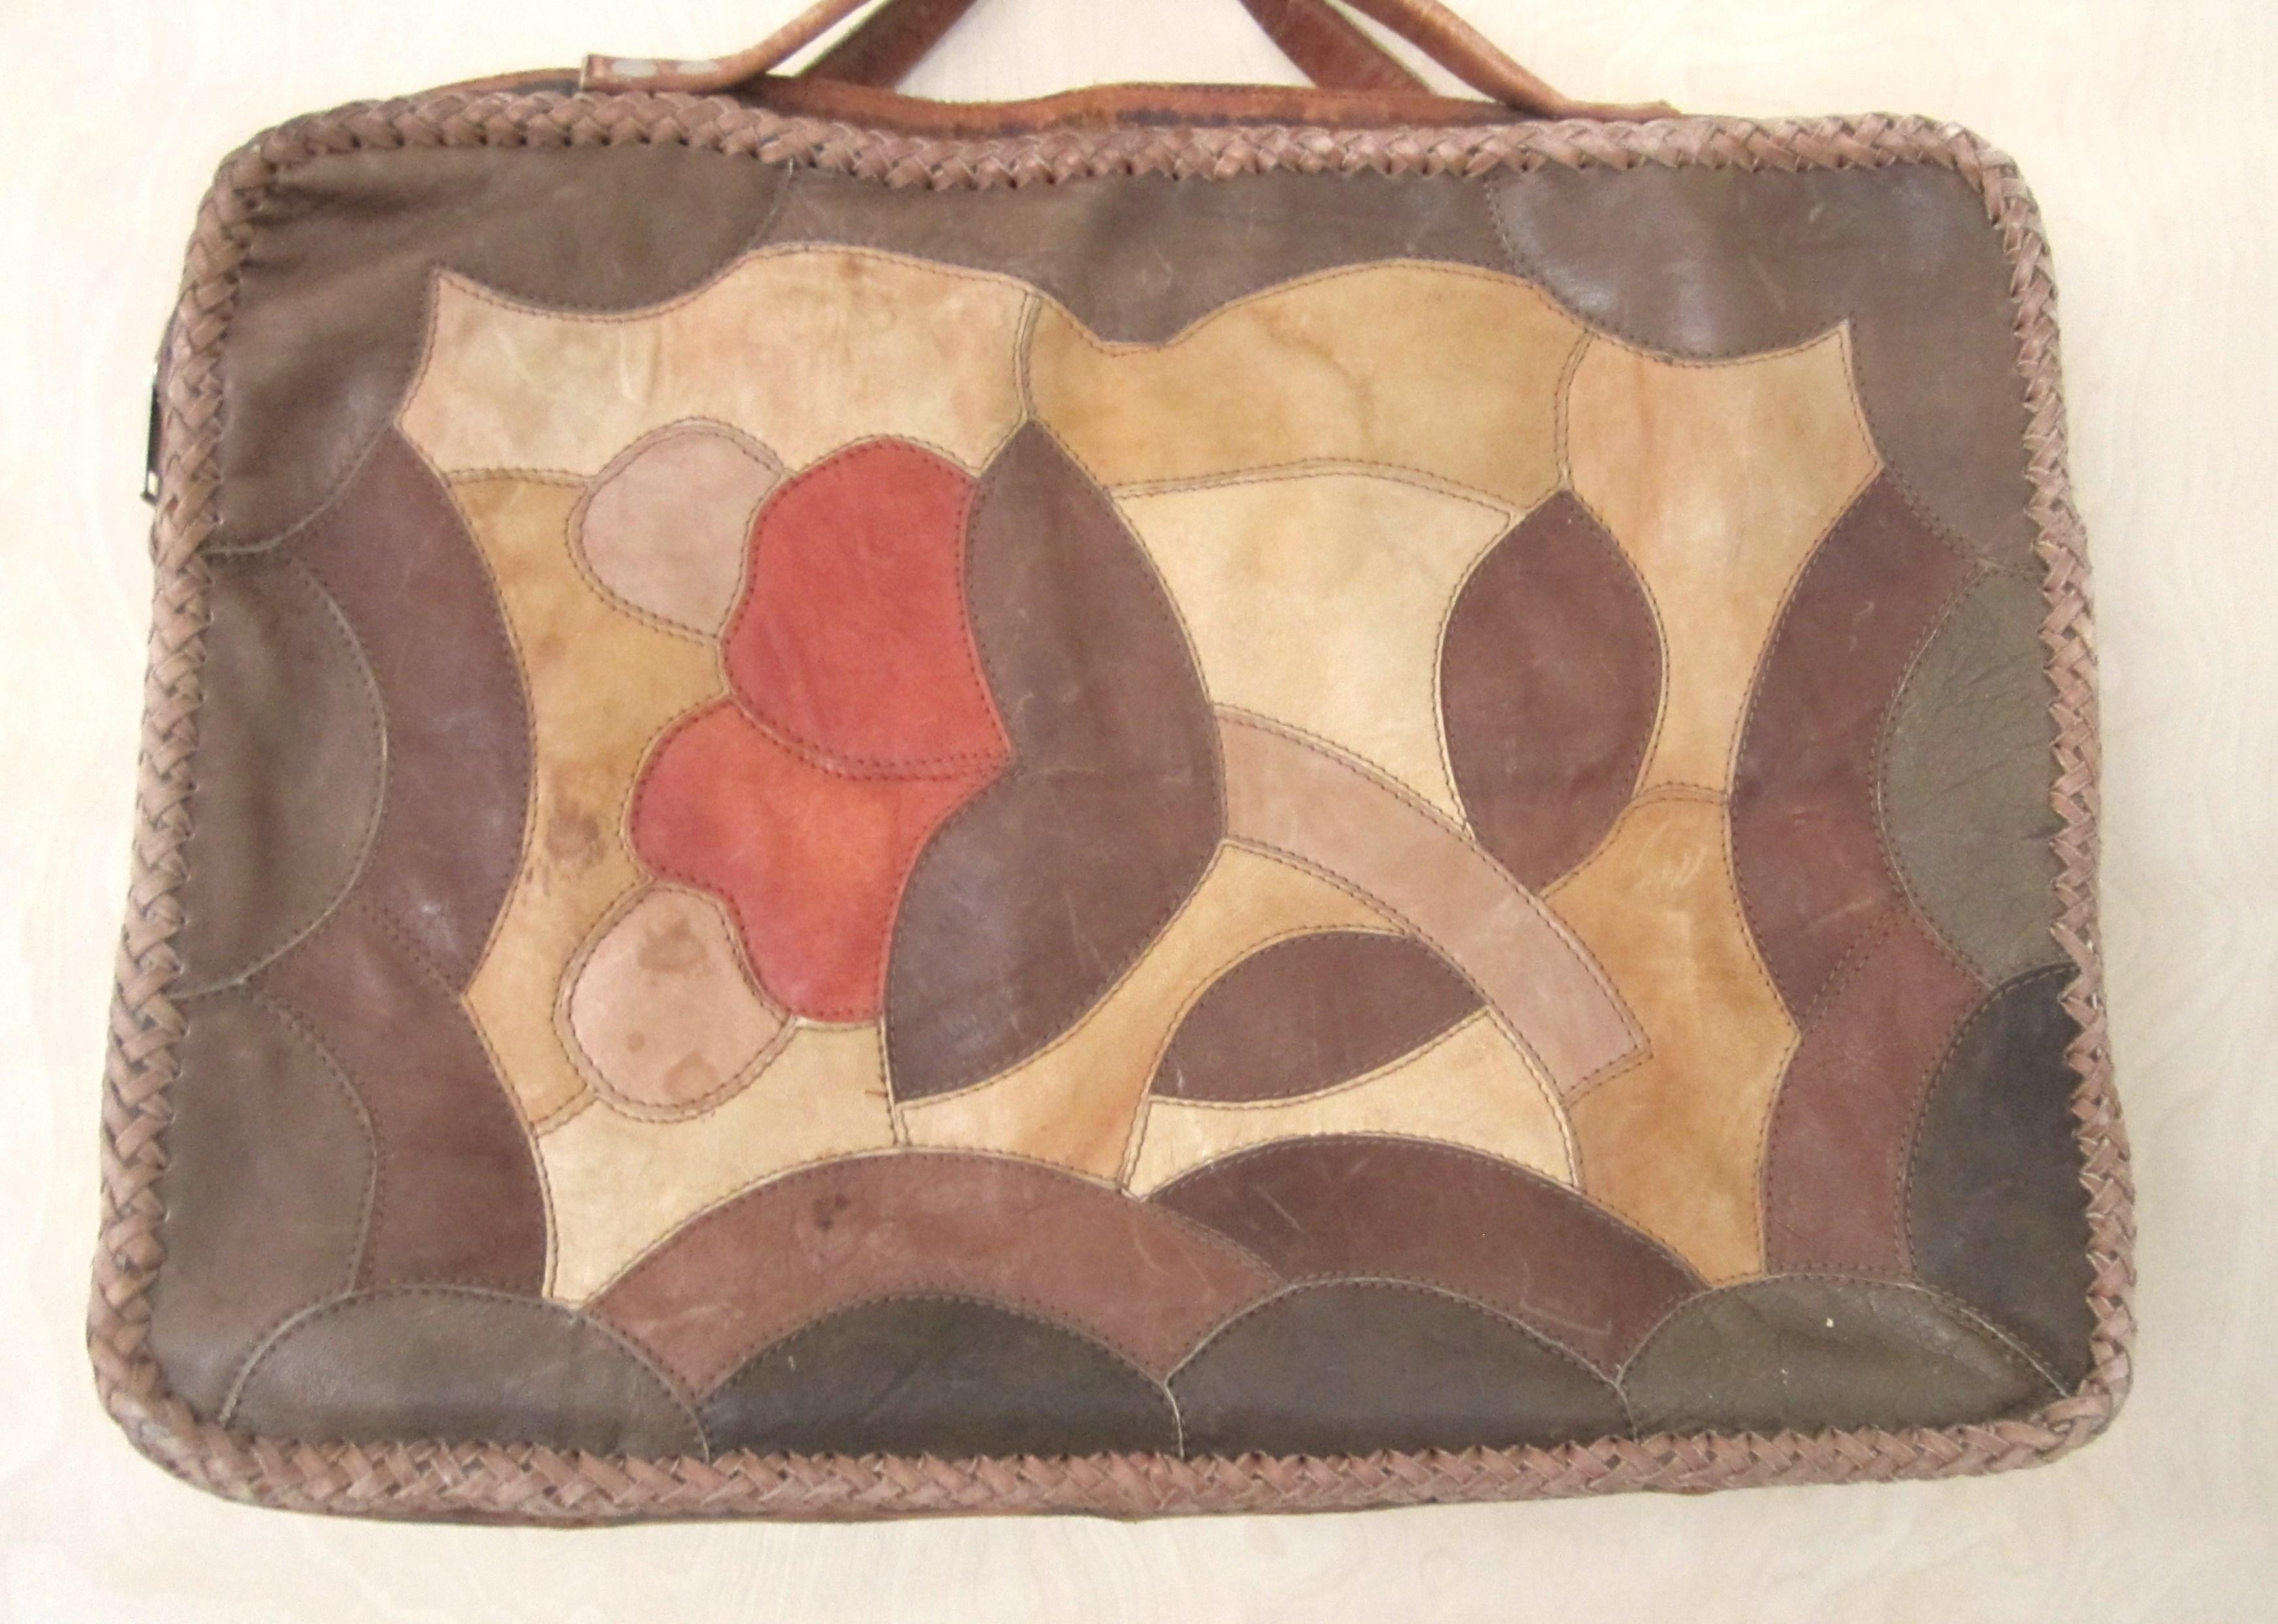 Rare find here, 1960s Char Leather case. It has compartments. Wipstiched, Floral motif. Great distressed look. Measuring 13 in high x 17.5in wide x 2.5 deep. We have more Char pieces on our storefront. Please be sure to check our storefront for more